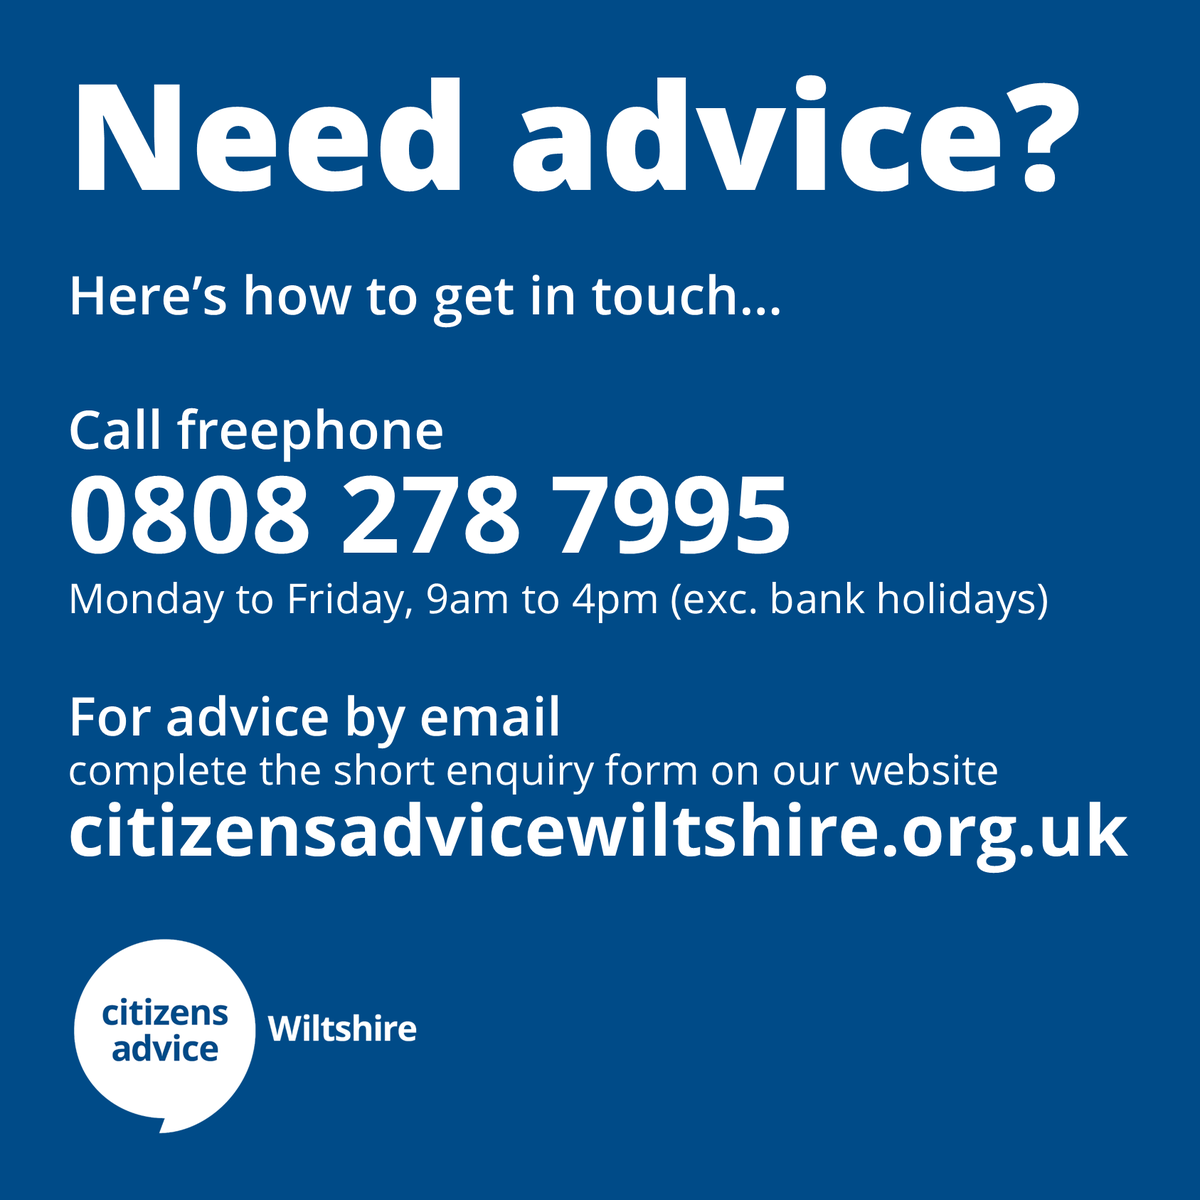 Need advice? We're here to help 📞 Call freephone 0808 278 7995 (Mon-Fri, 9am-4pm) 📧 Email via our webform: citizensadvicewiltshire.org.uk/contact-us For more ways to get in touch visit: citizensadvicewiltshire.org.uk/get-advice